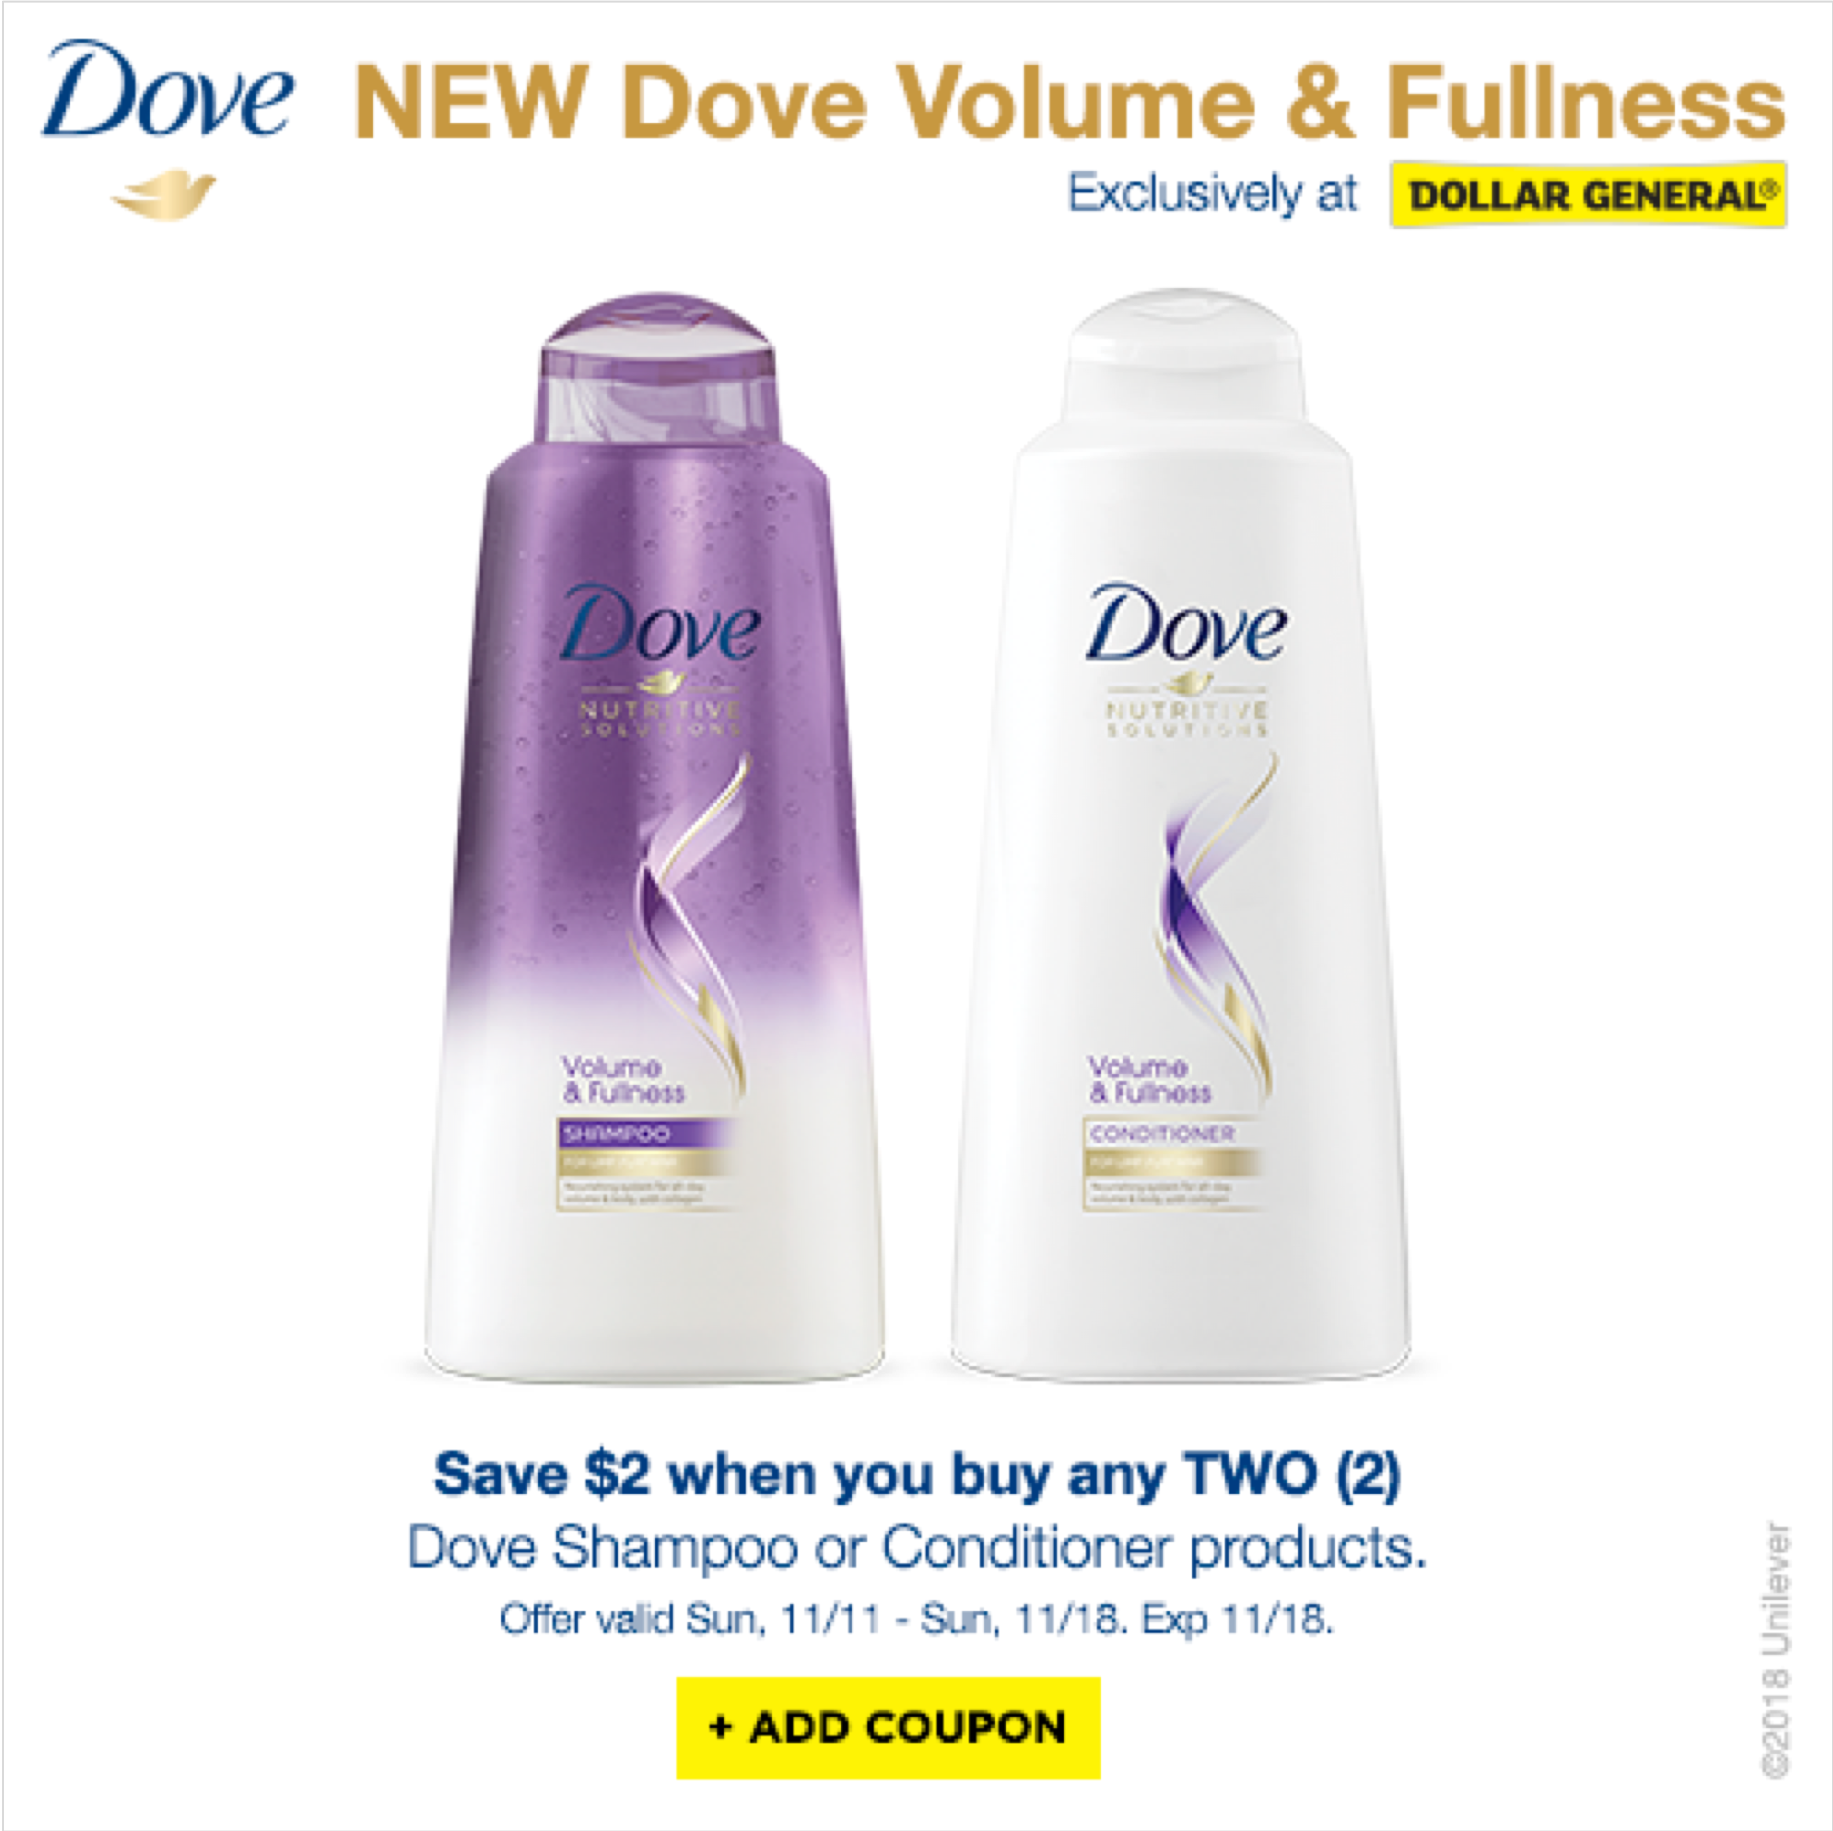 Dove Volume & Fullness Shampoo and Conditioner exclusively at Dollar General